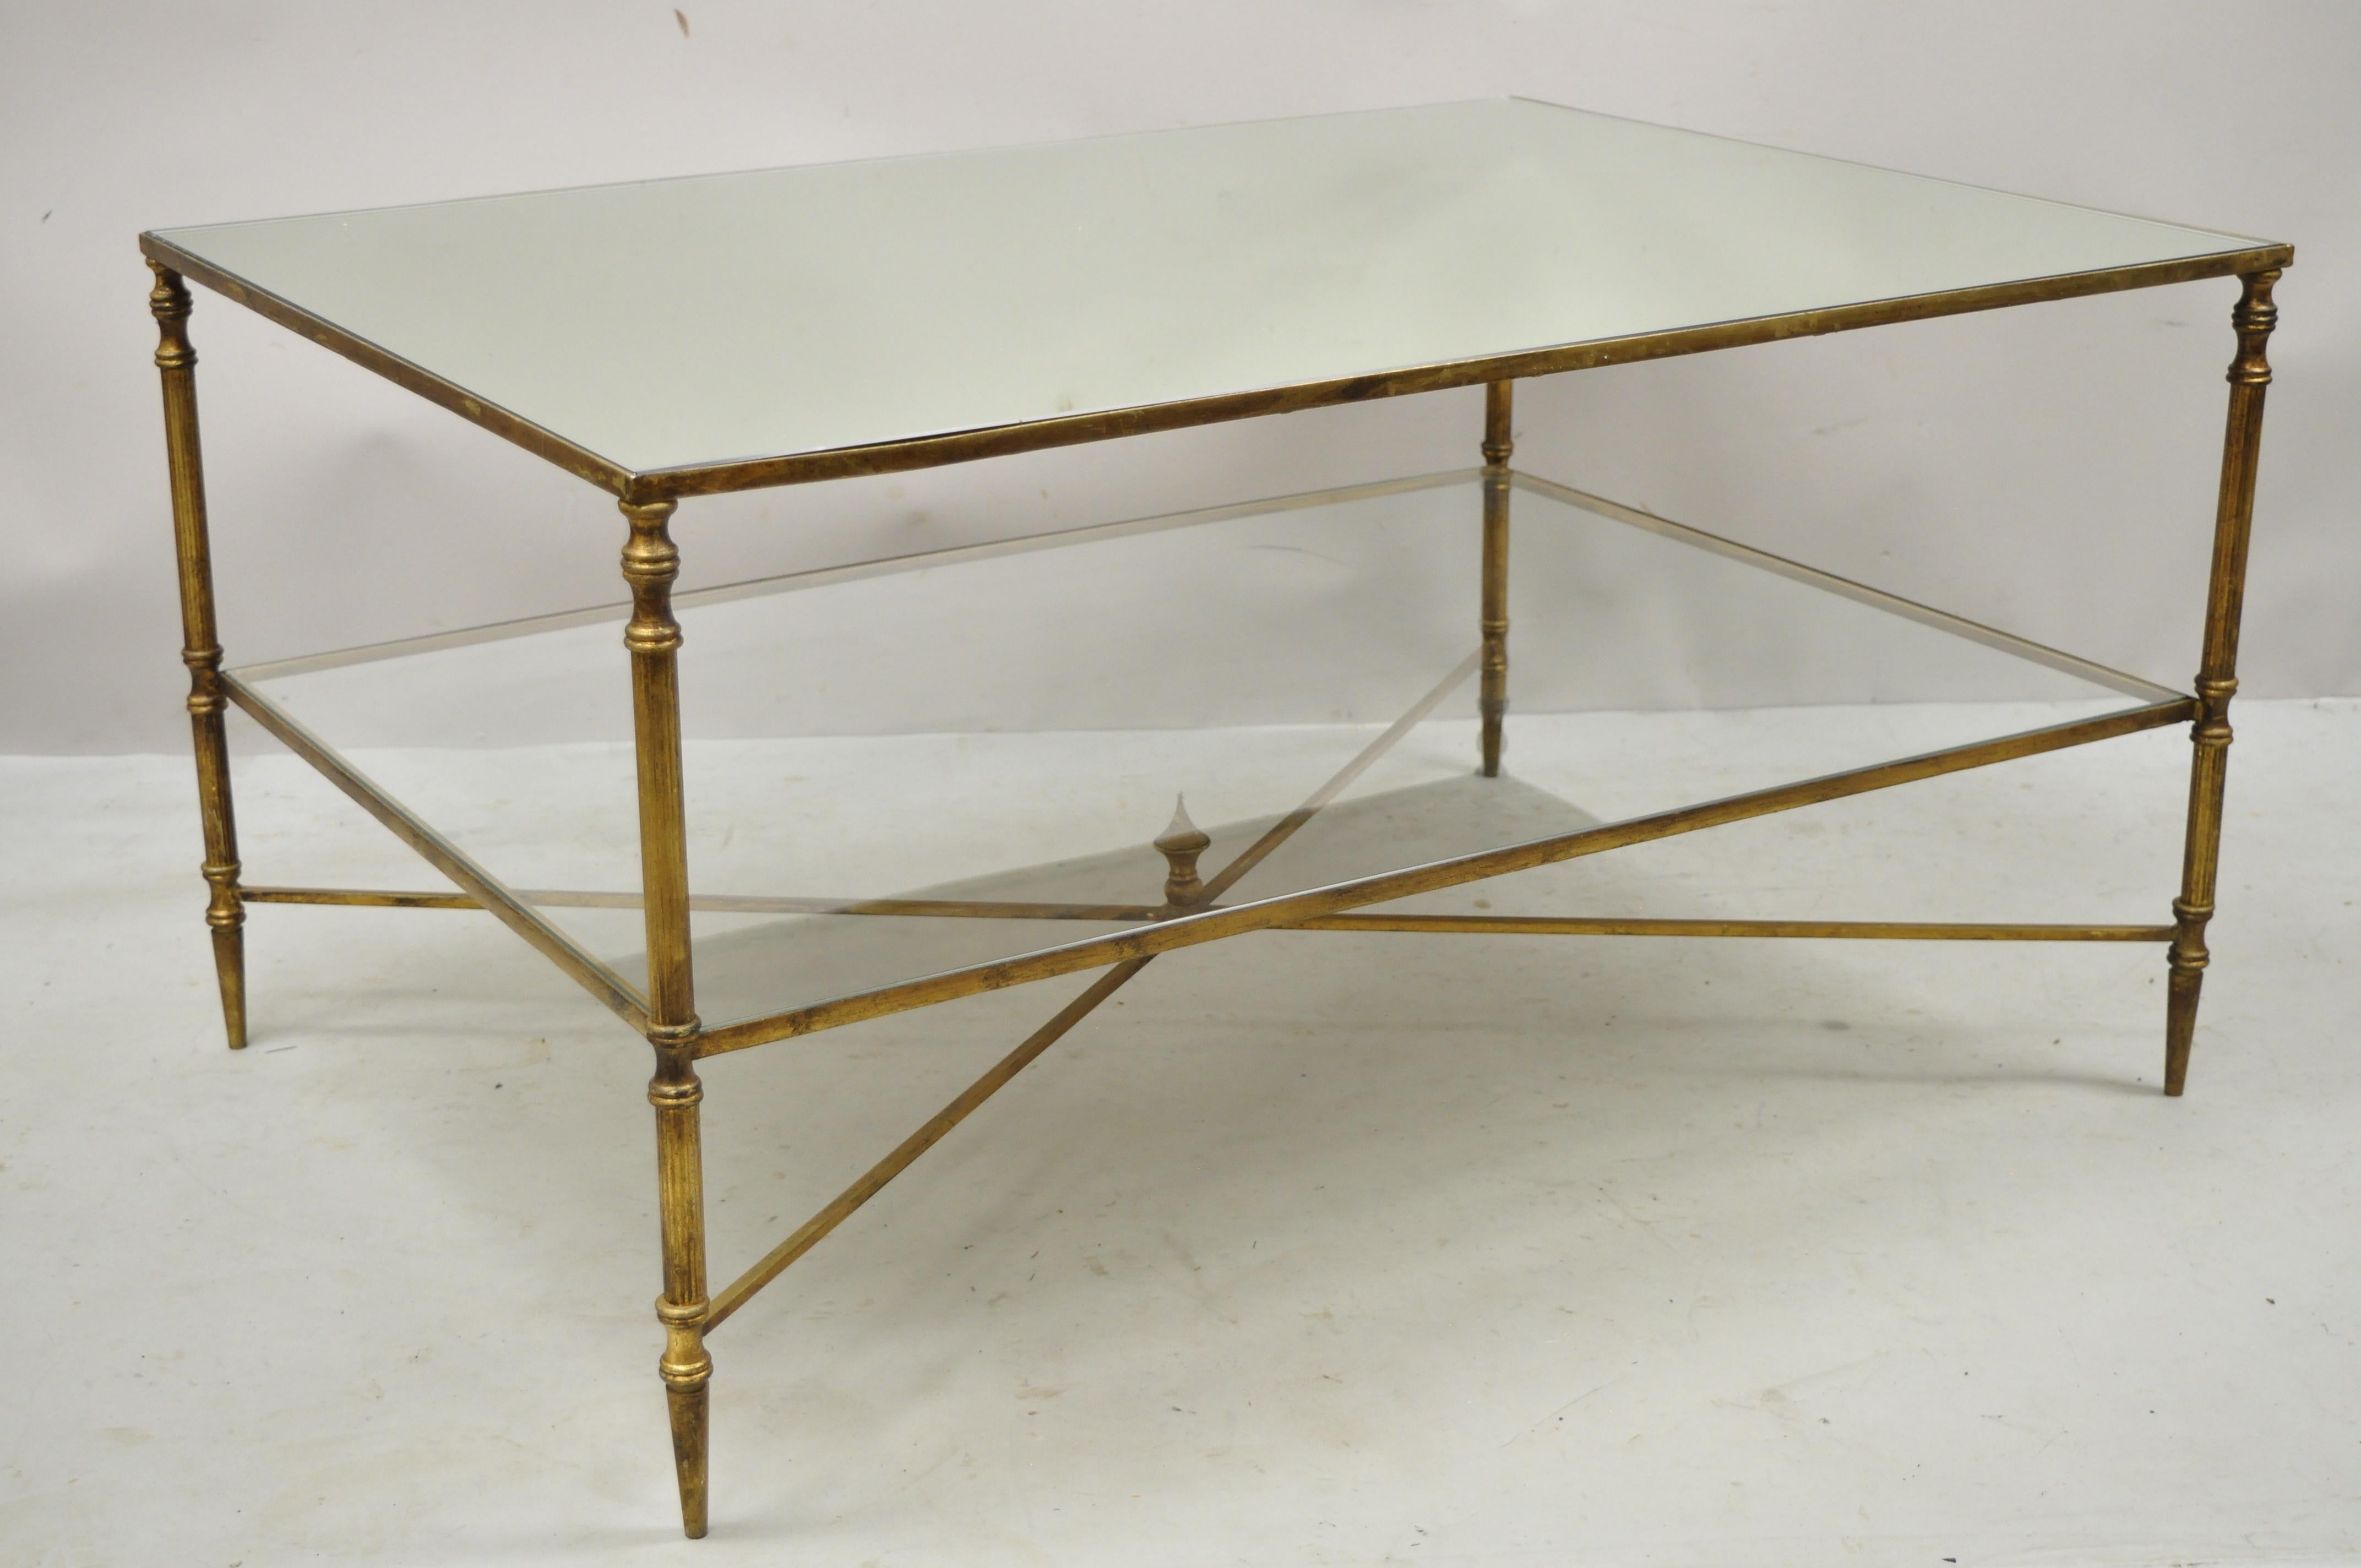 Vintage Italian Hollywood Regency Gold Iron Frame Coffee Table with Mirror Top 8